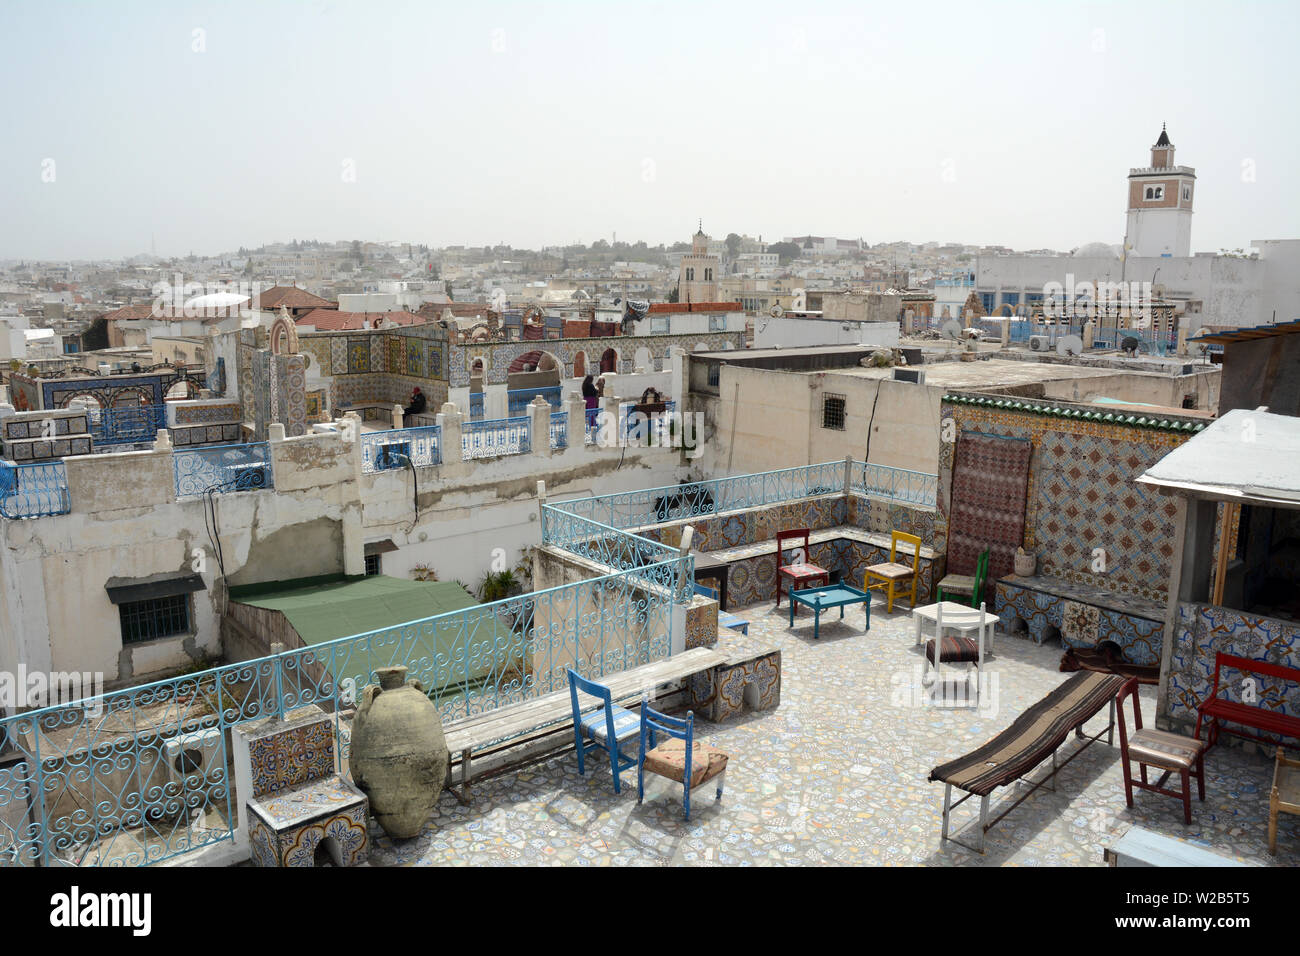 A rooftop view of the Tunis old city and medina overlooking a number of mosques, Tunis, Tunisia. Stock Photo